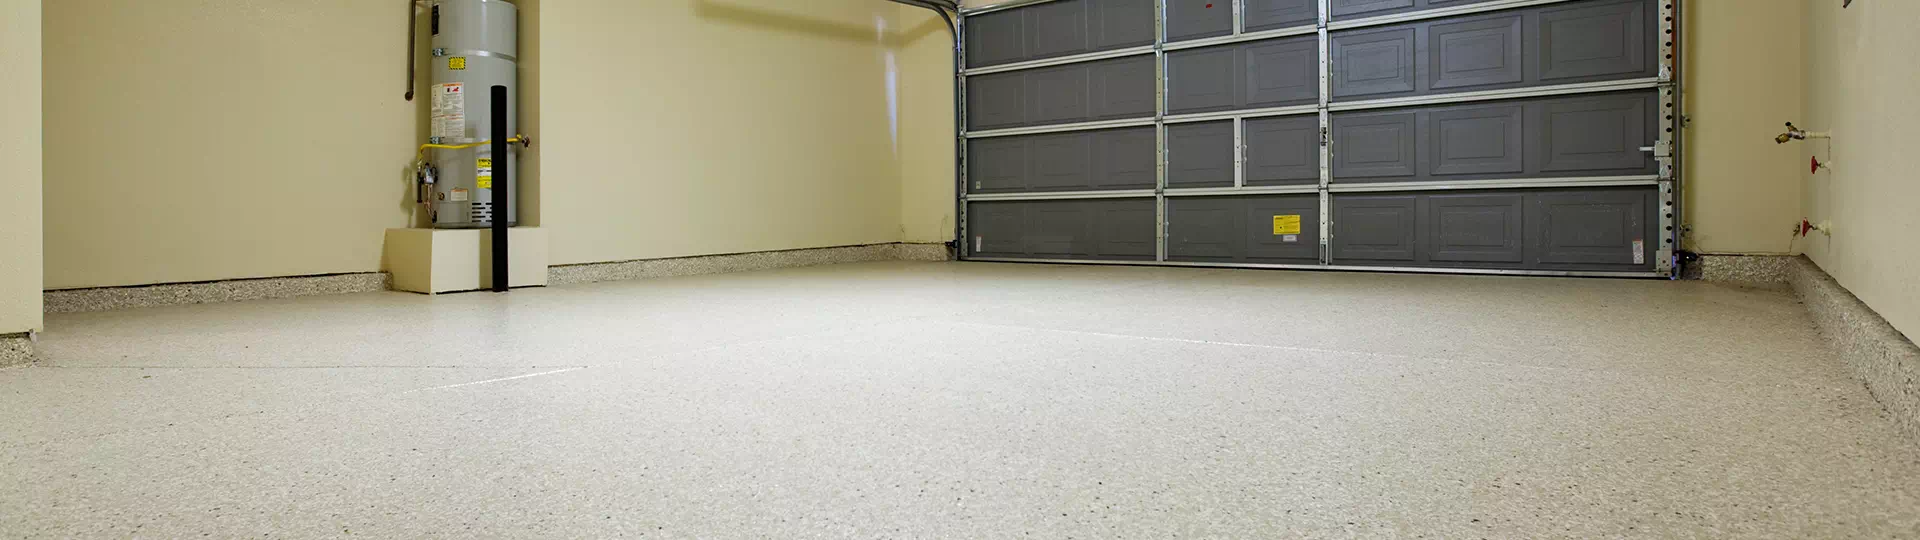 How to Clean Epoxy Floors - Simple Green